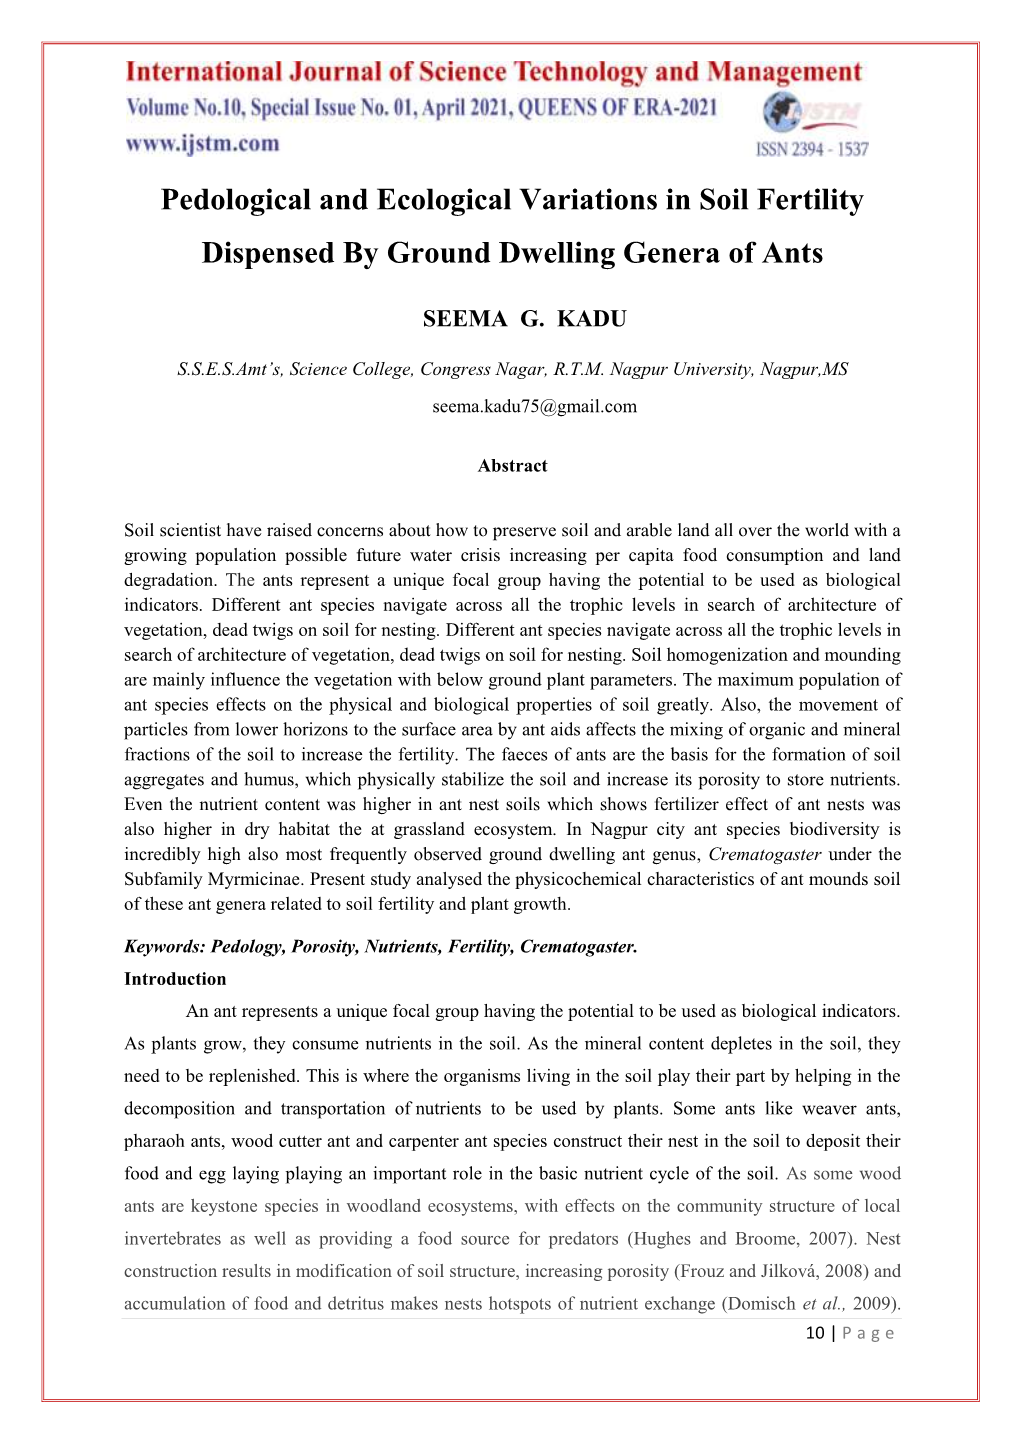 Pedological and Ecological Variations in Soil Fertility Dispensed by Ground Dwelling Genera of Ants